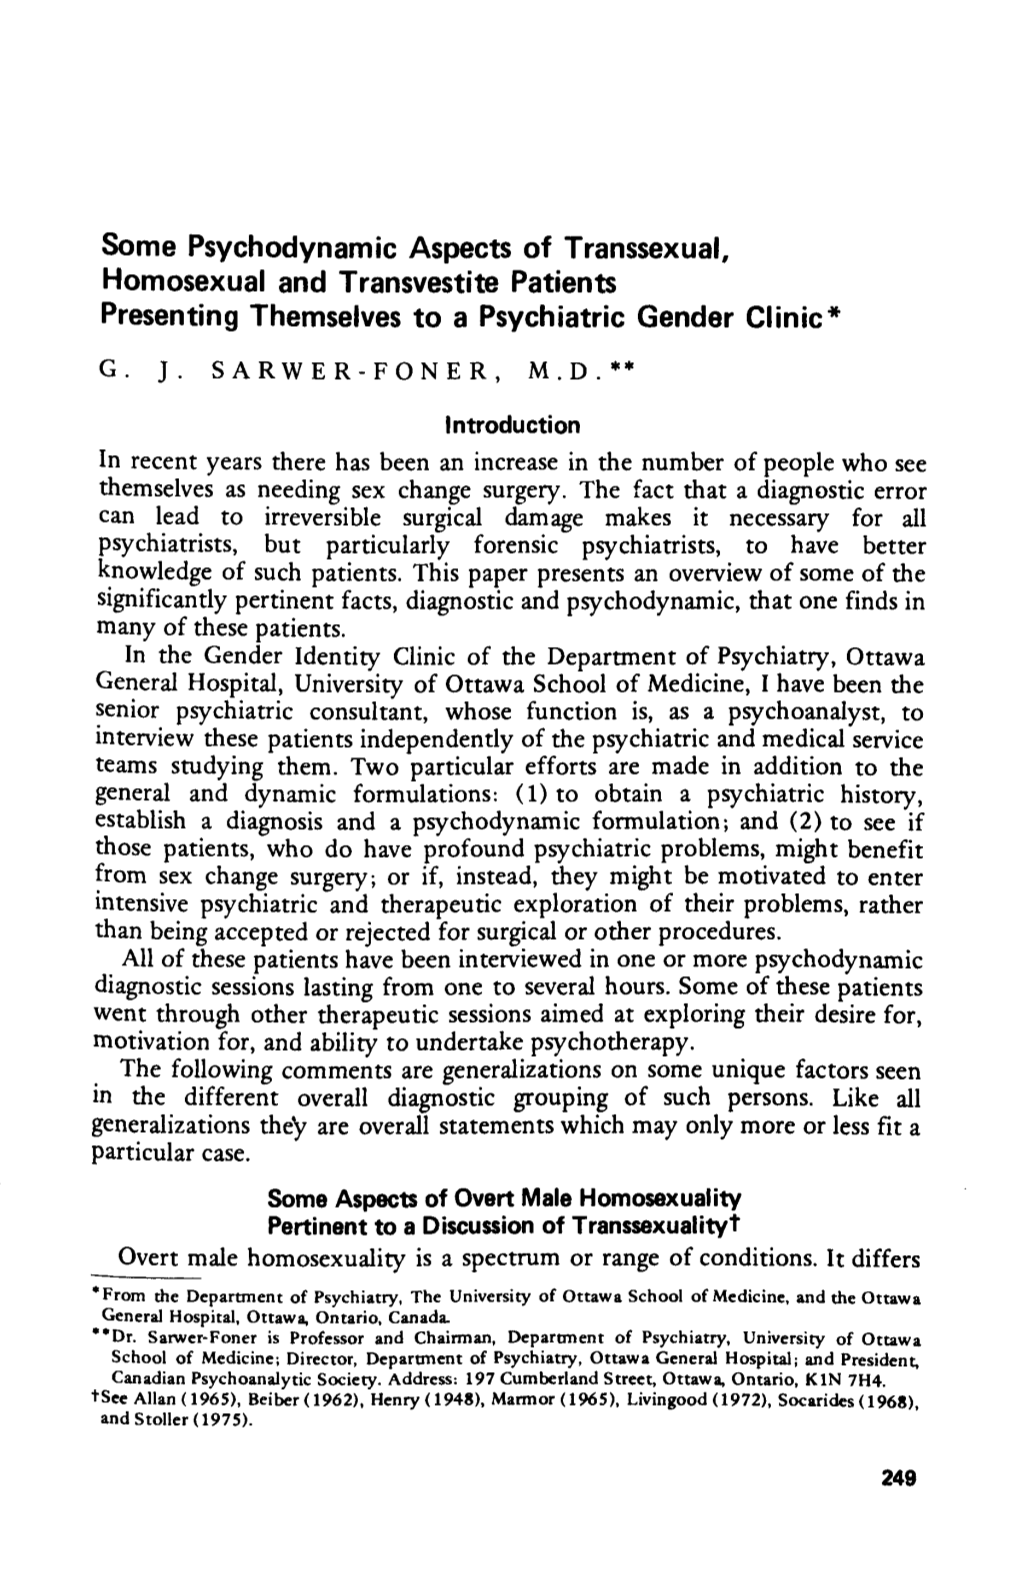 Some Psychodynamic Aspects of Transsexual, Homosexual and Transvestite Patients Presenting Themselves to a Psychiatric Gender Clinic*